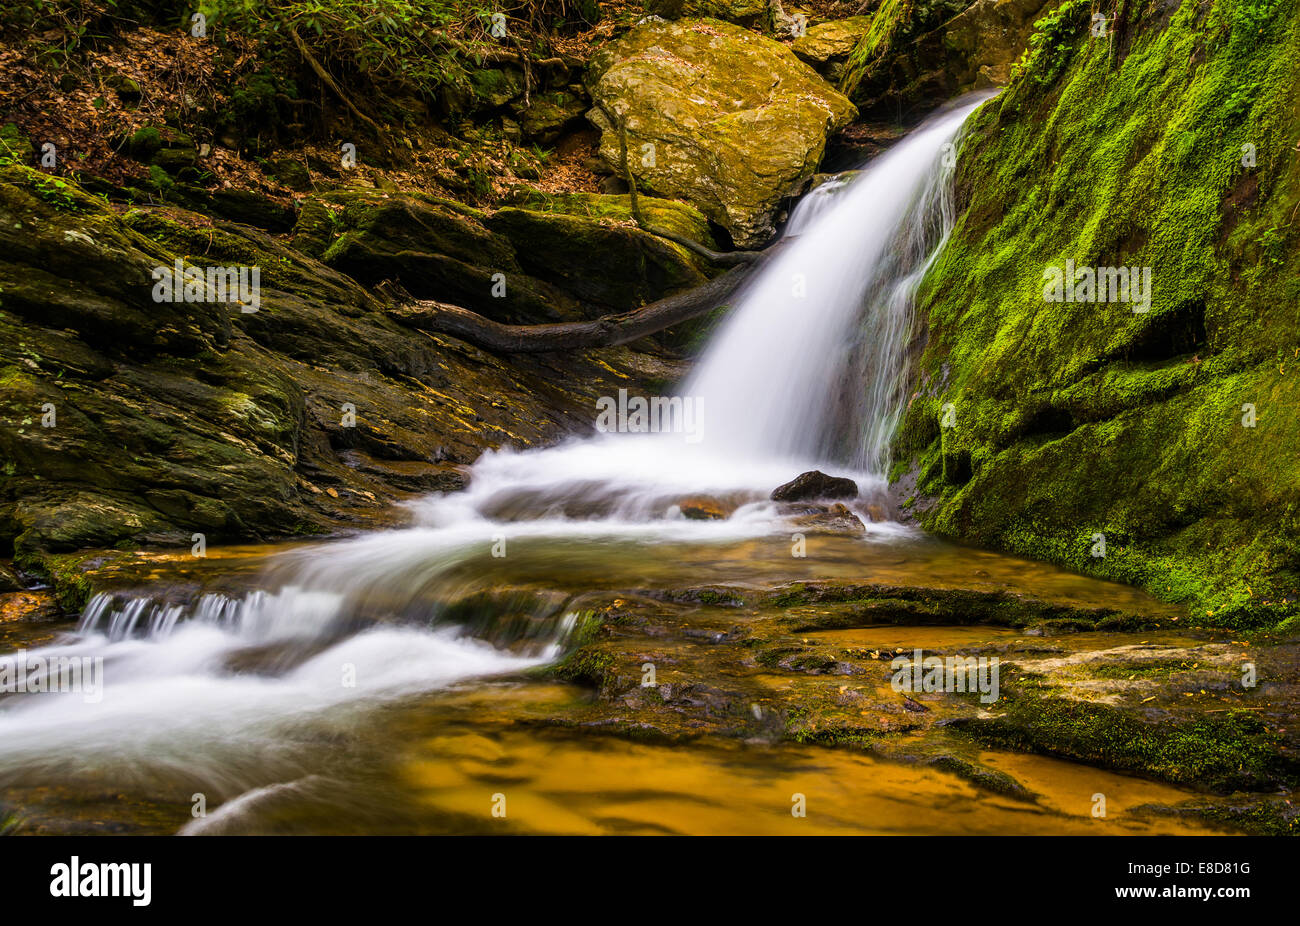 Waterfall and cascades on a stream in Holtwood, Pennsylvania. Stock Photo